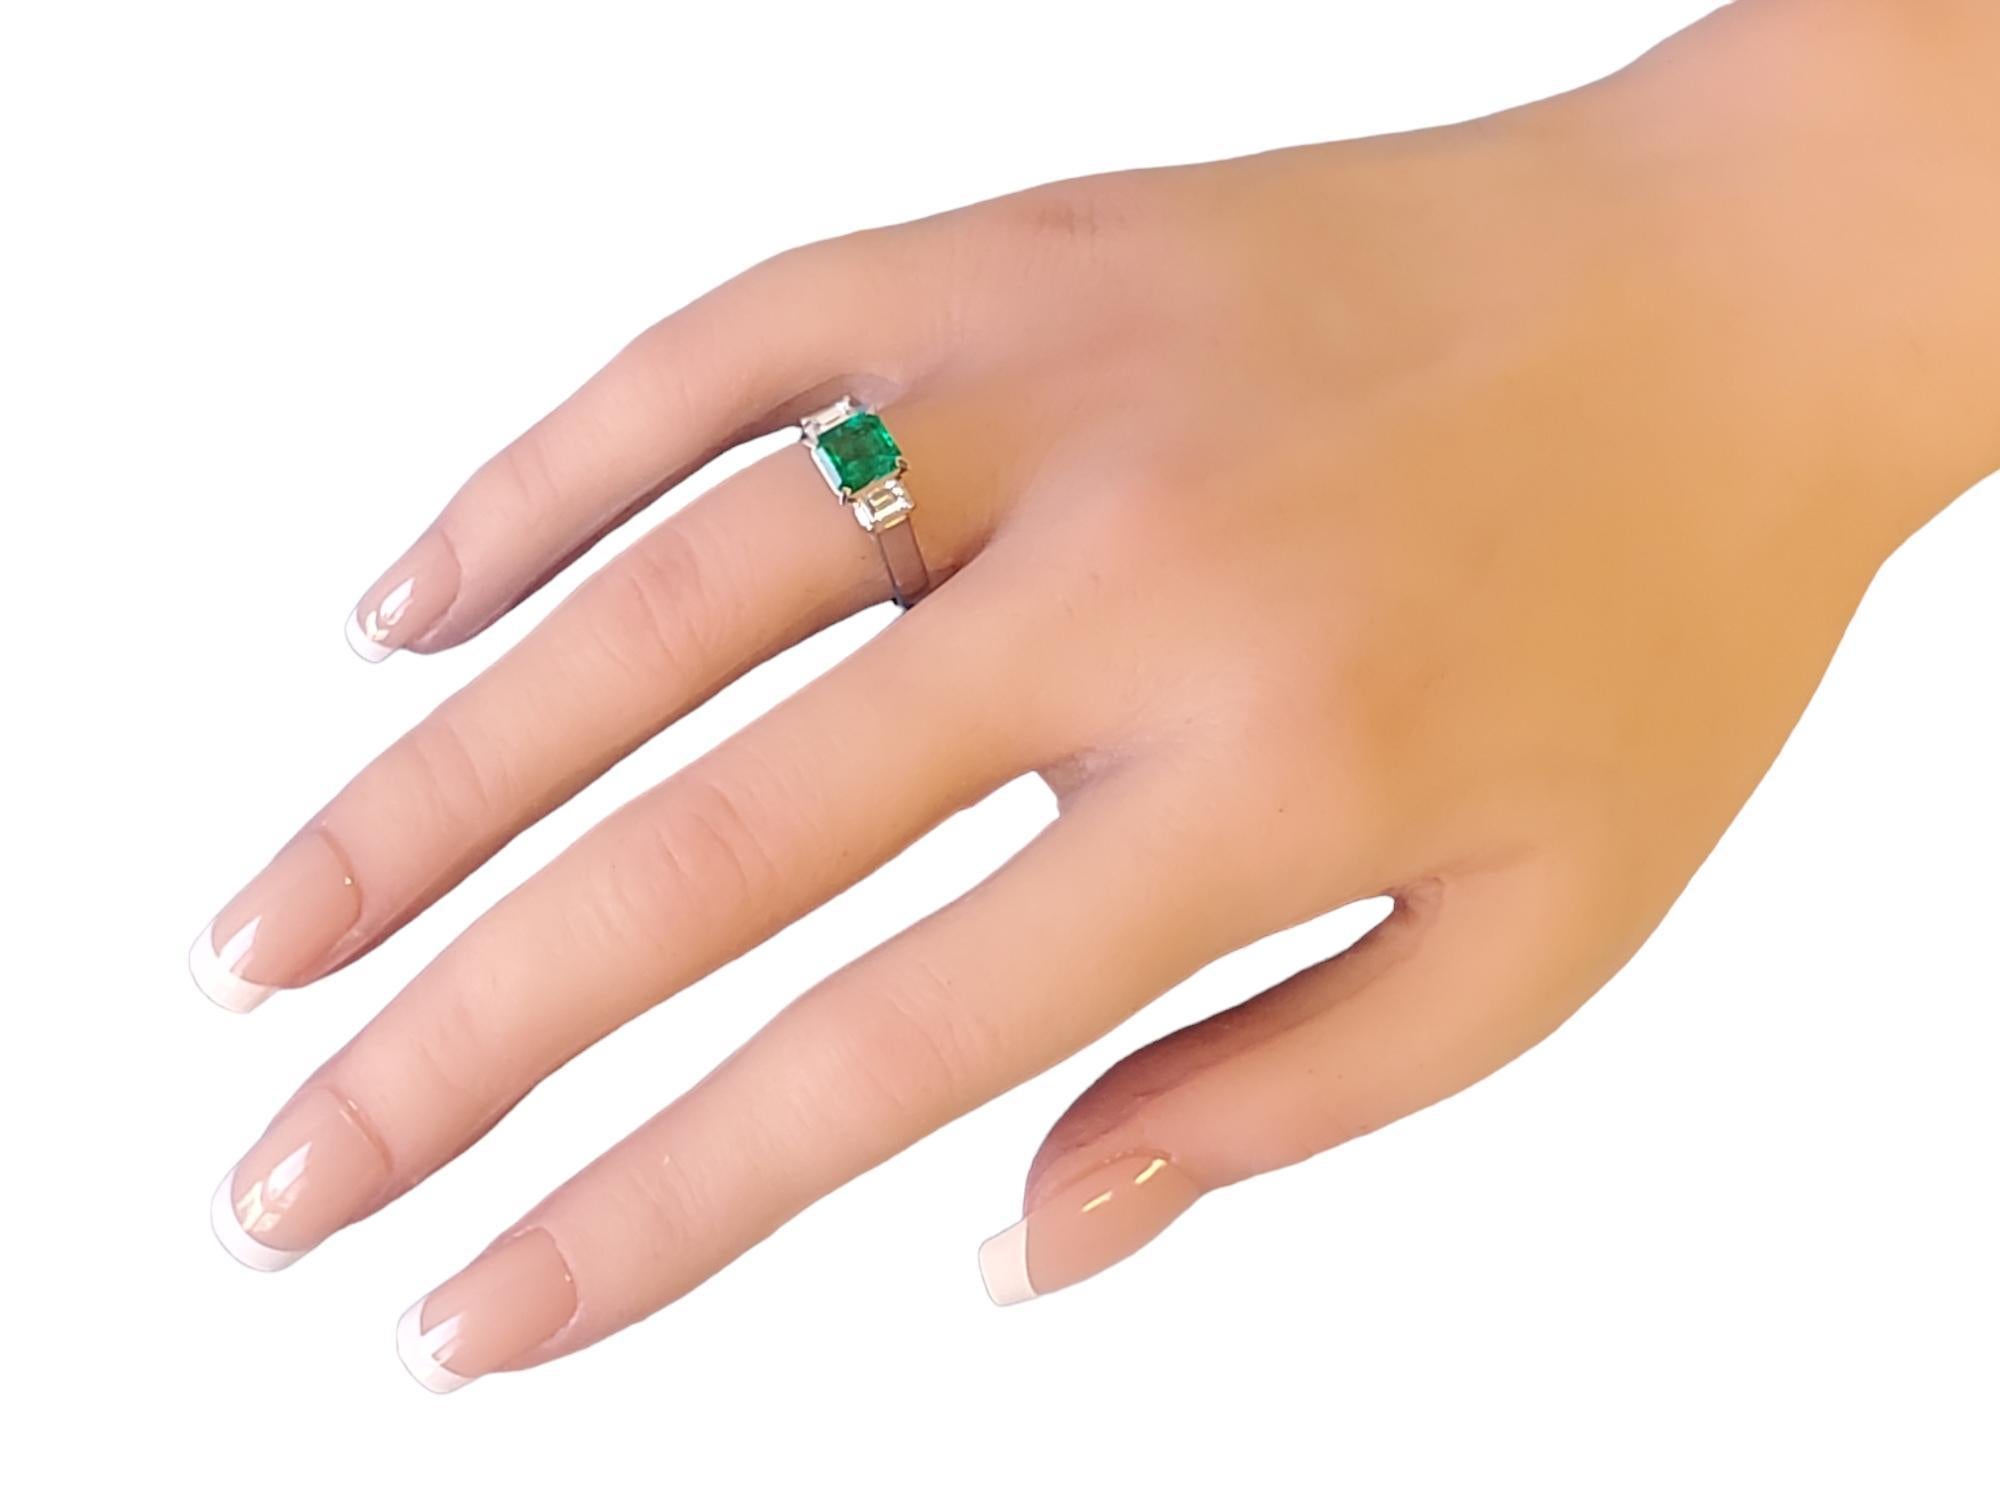 Estate platinum ring with a 1.13ct Colombian Emerald step cut stone flanked with 2 white Vs diamond baguettes .35tcw. The emerald features a deep and vibrant green color indicative of Colombian emeralds. This ring is accompanied with a GIA report.